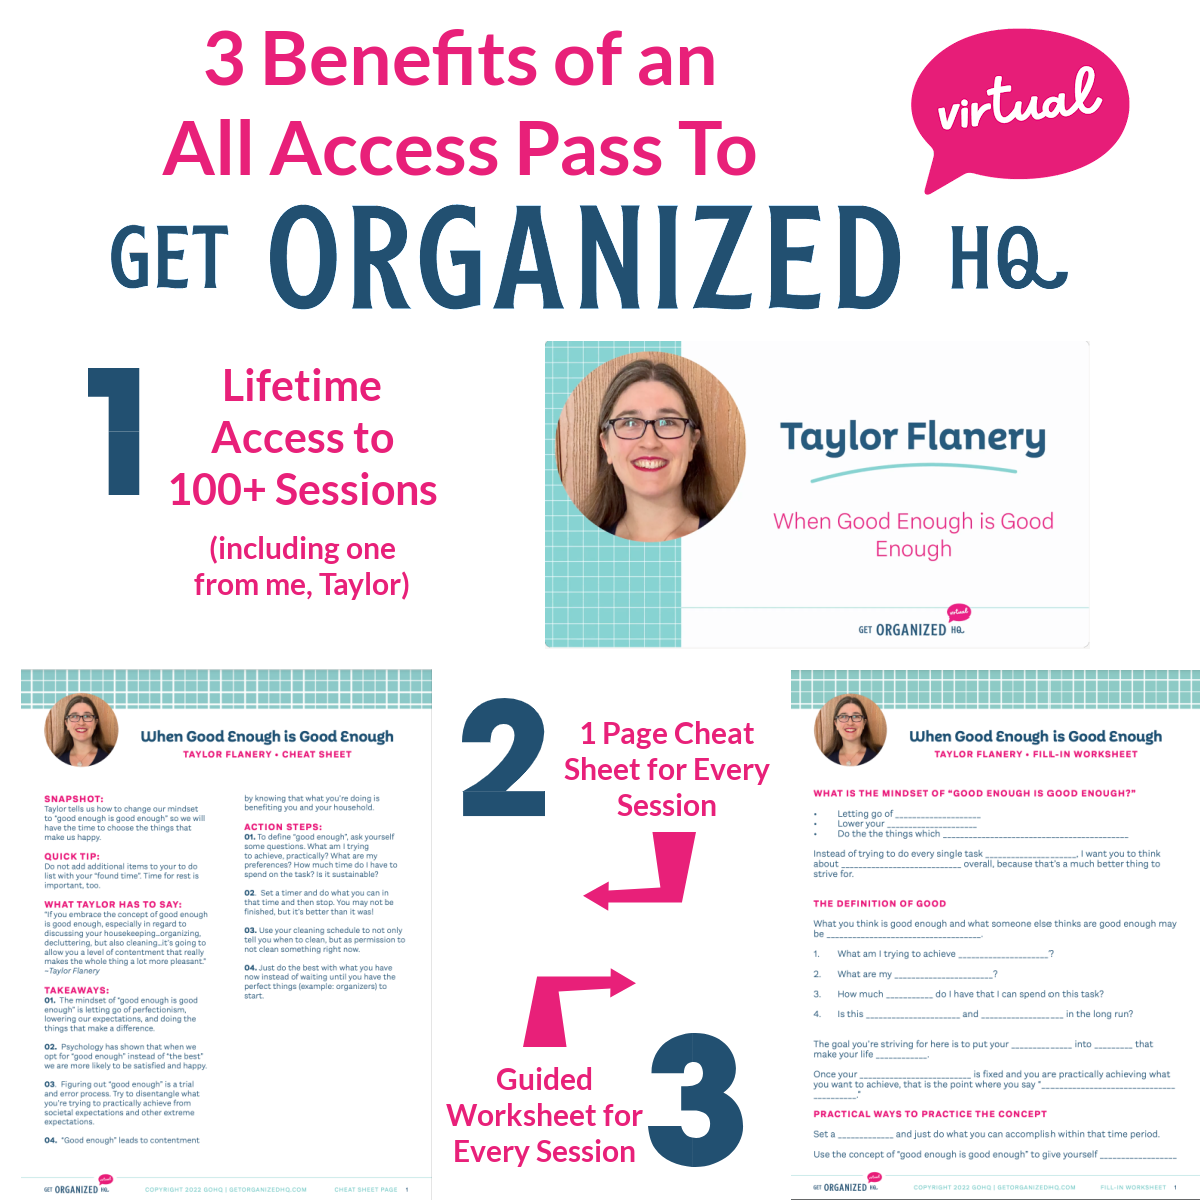 3 benefits to an All Access Pass to Get Organized HQ